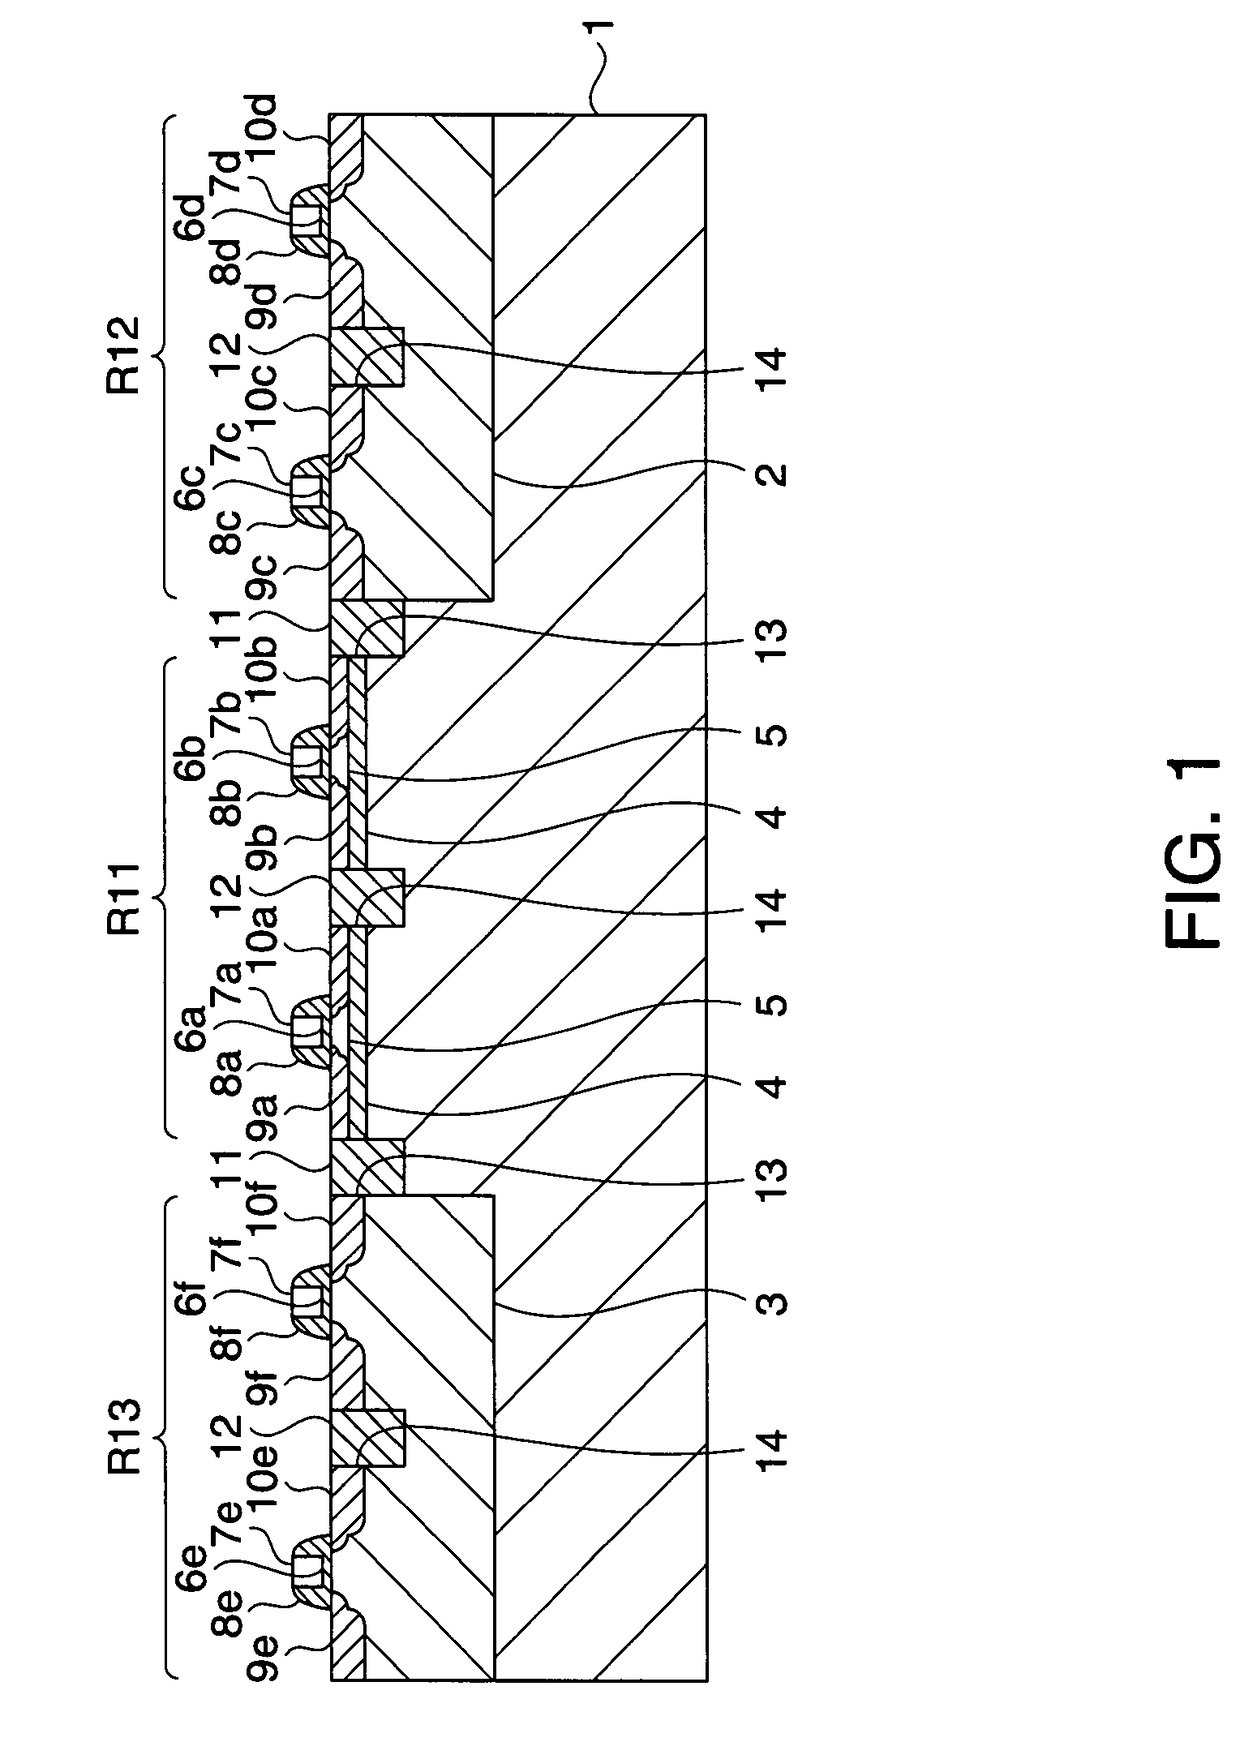 Semiconductor device having a first circuit block isolating a plurality of circuit blocks